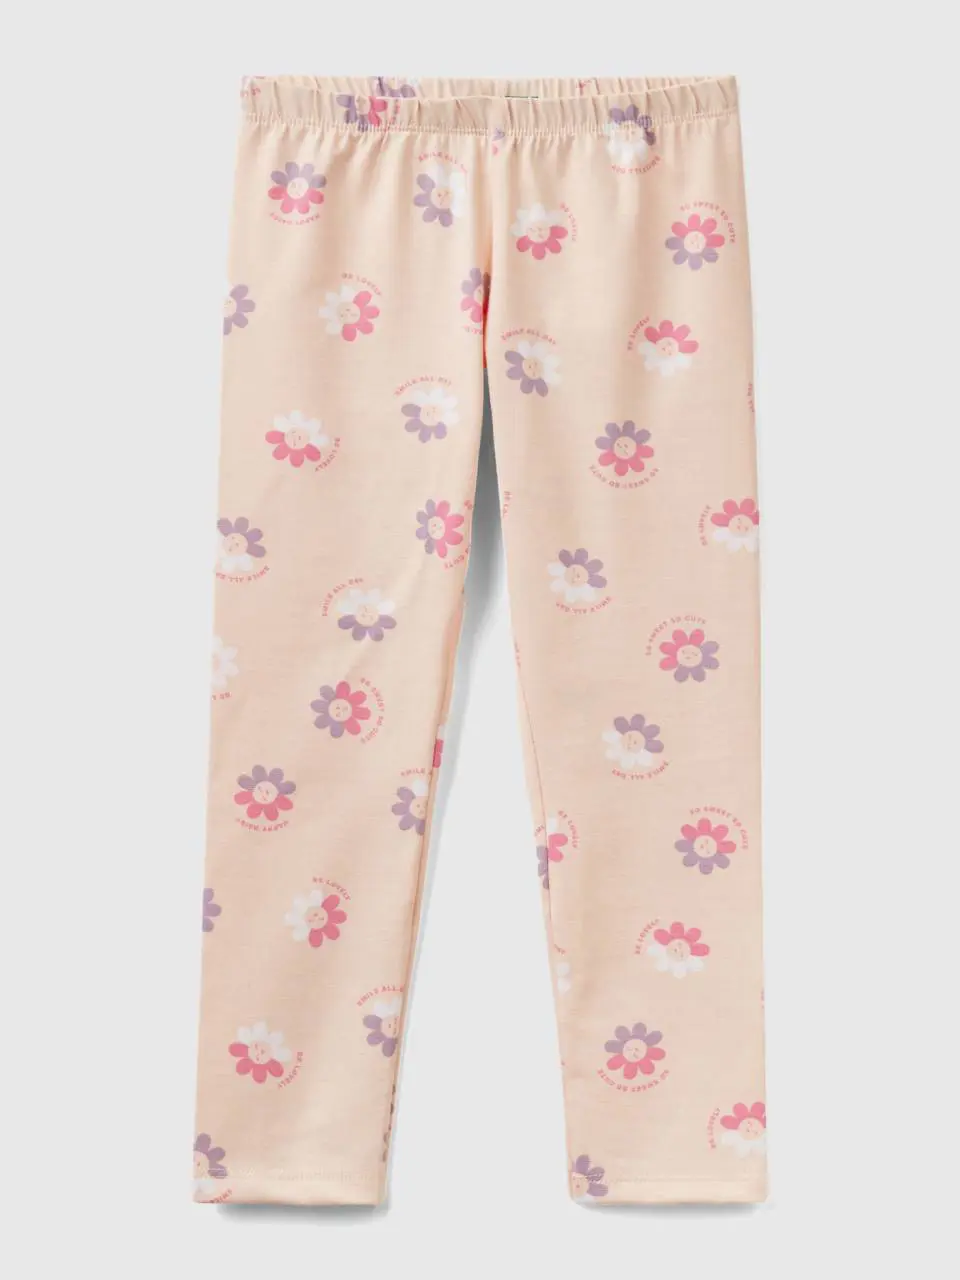 Benetton pastel pink leggings with floral print. 1